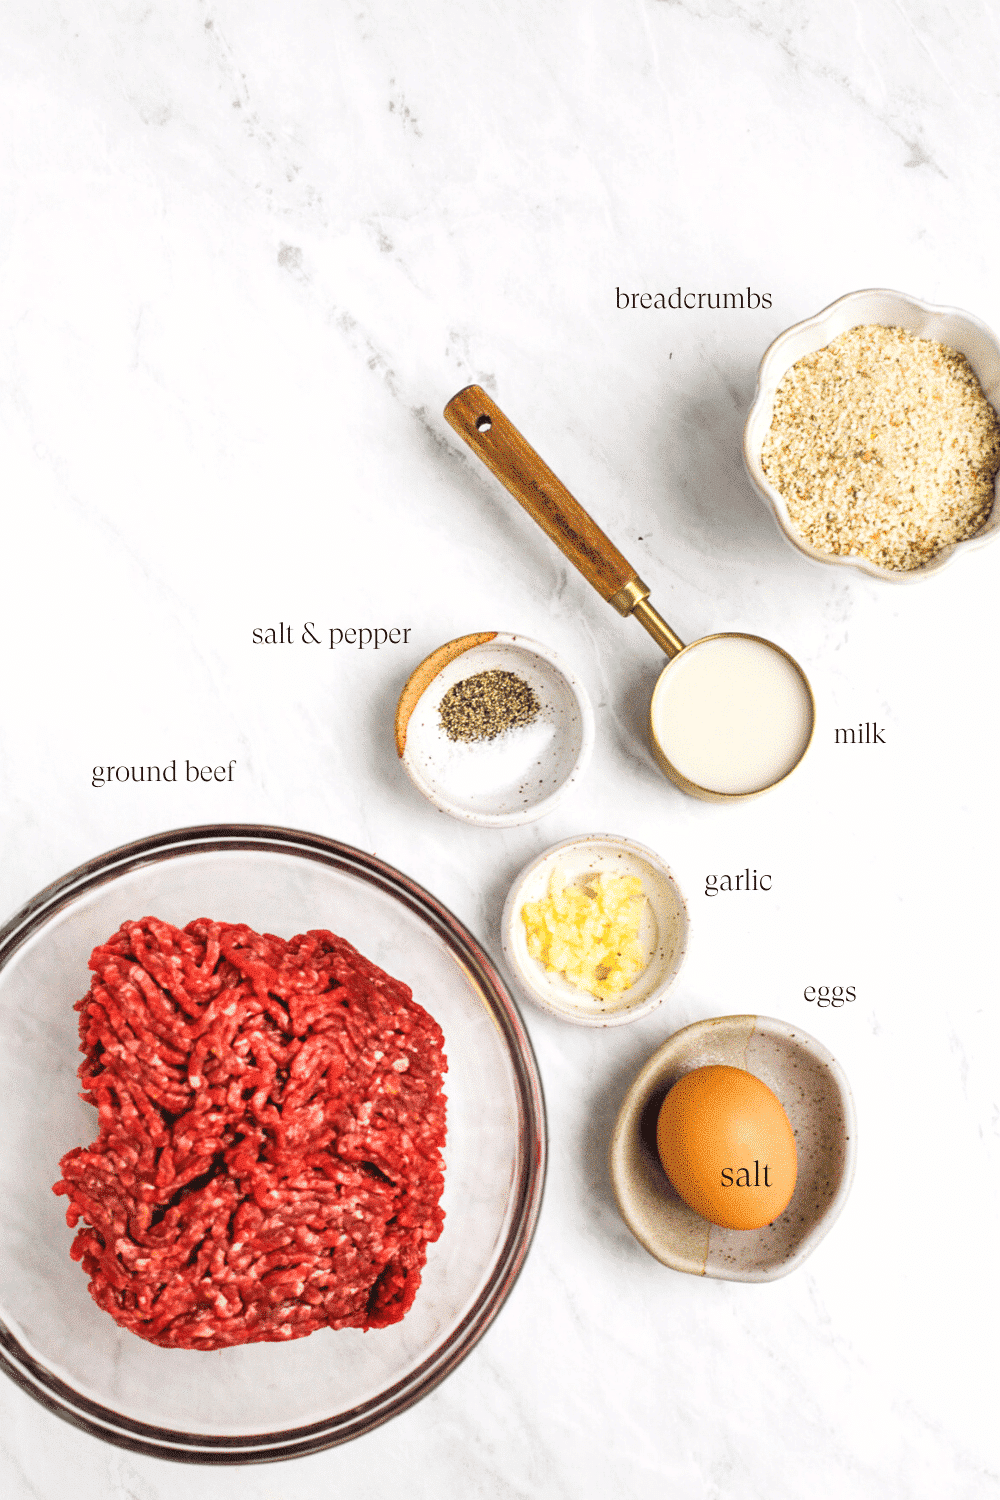 list of ingredients to make the meatballs